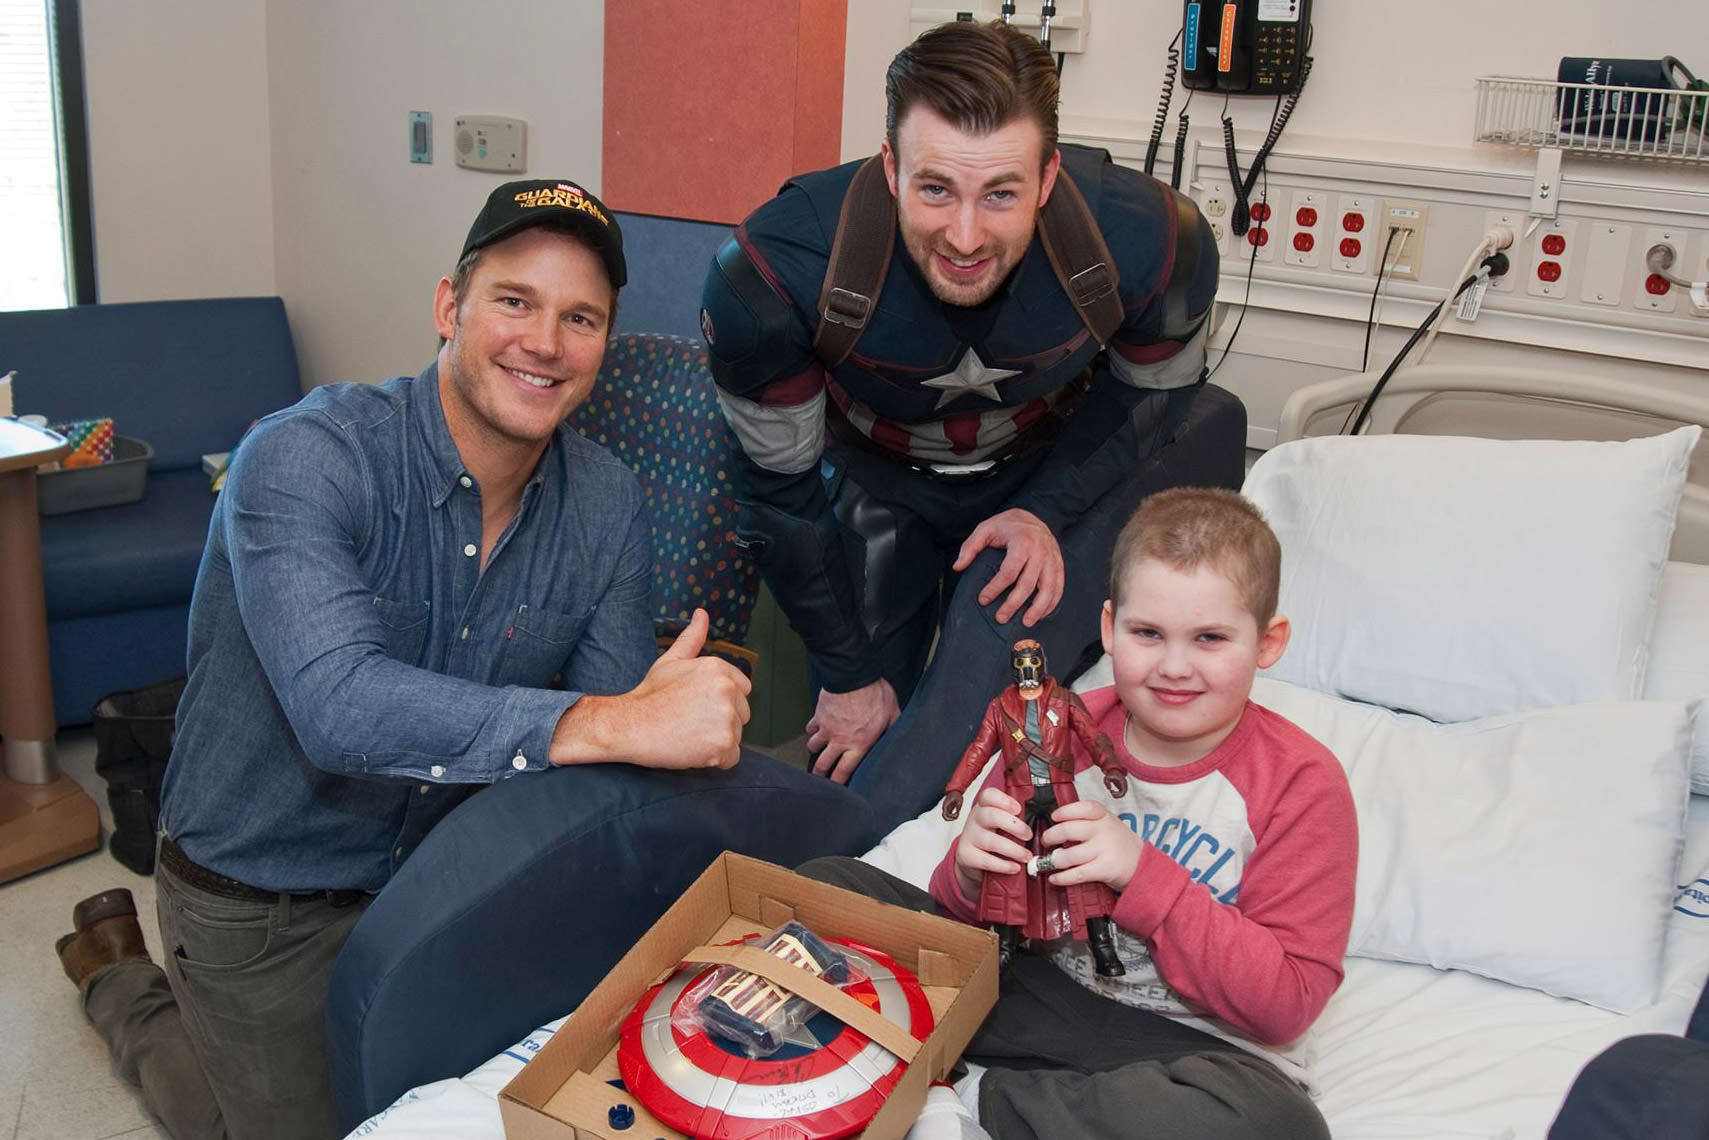 Captain America and Star Lord visit Seattle Children's Hospital